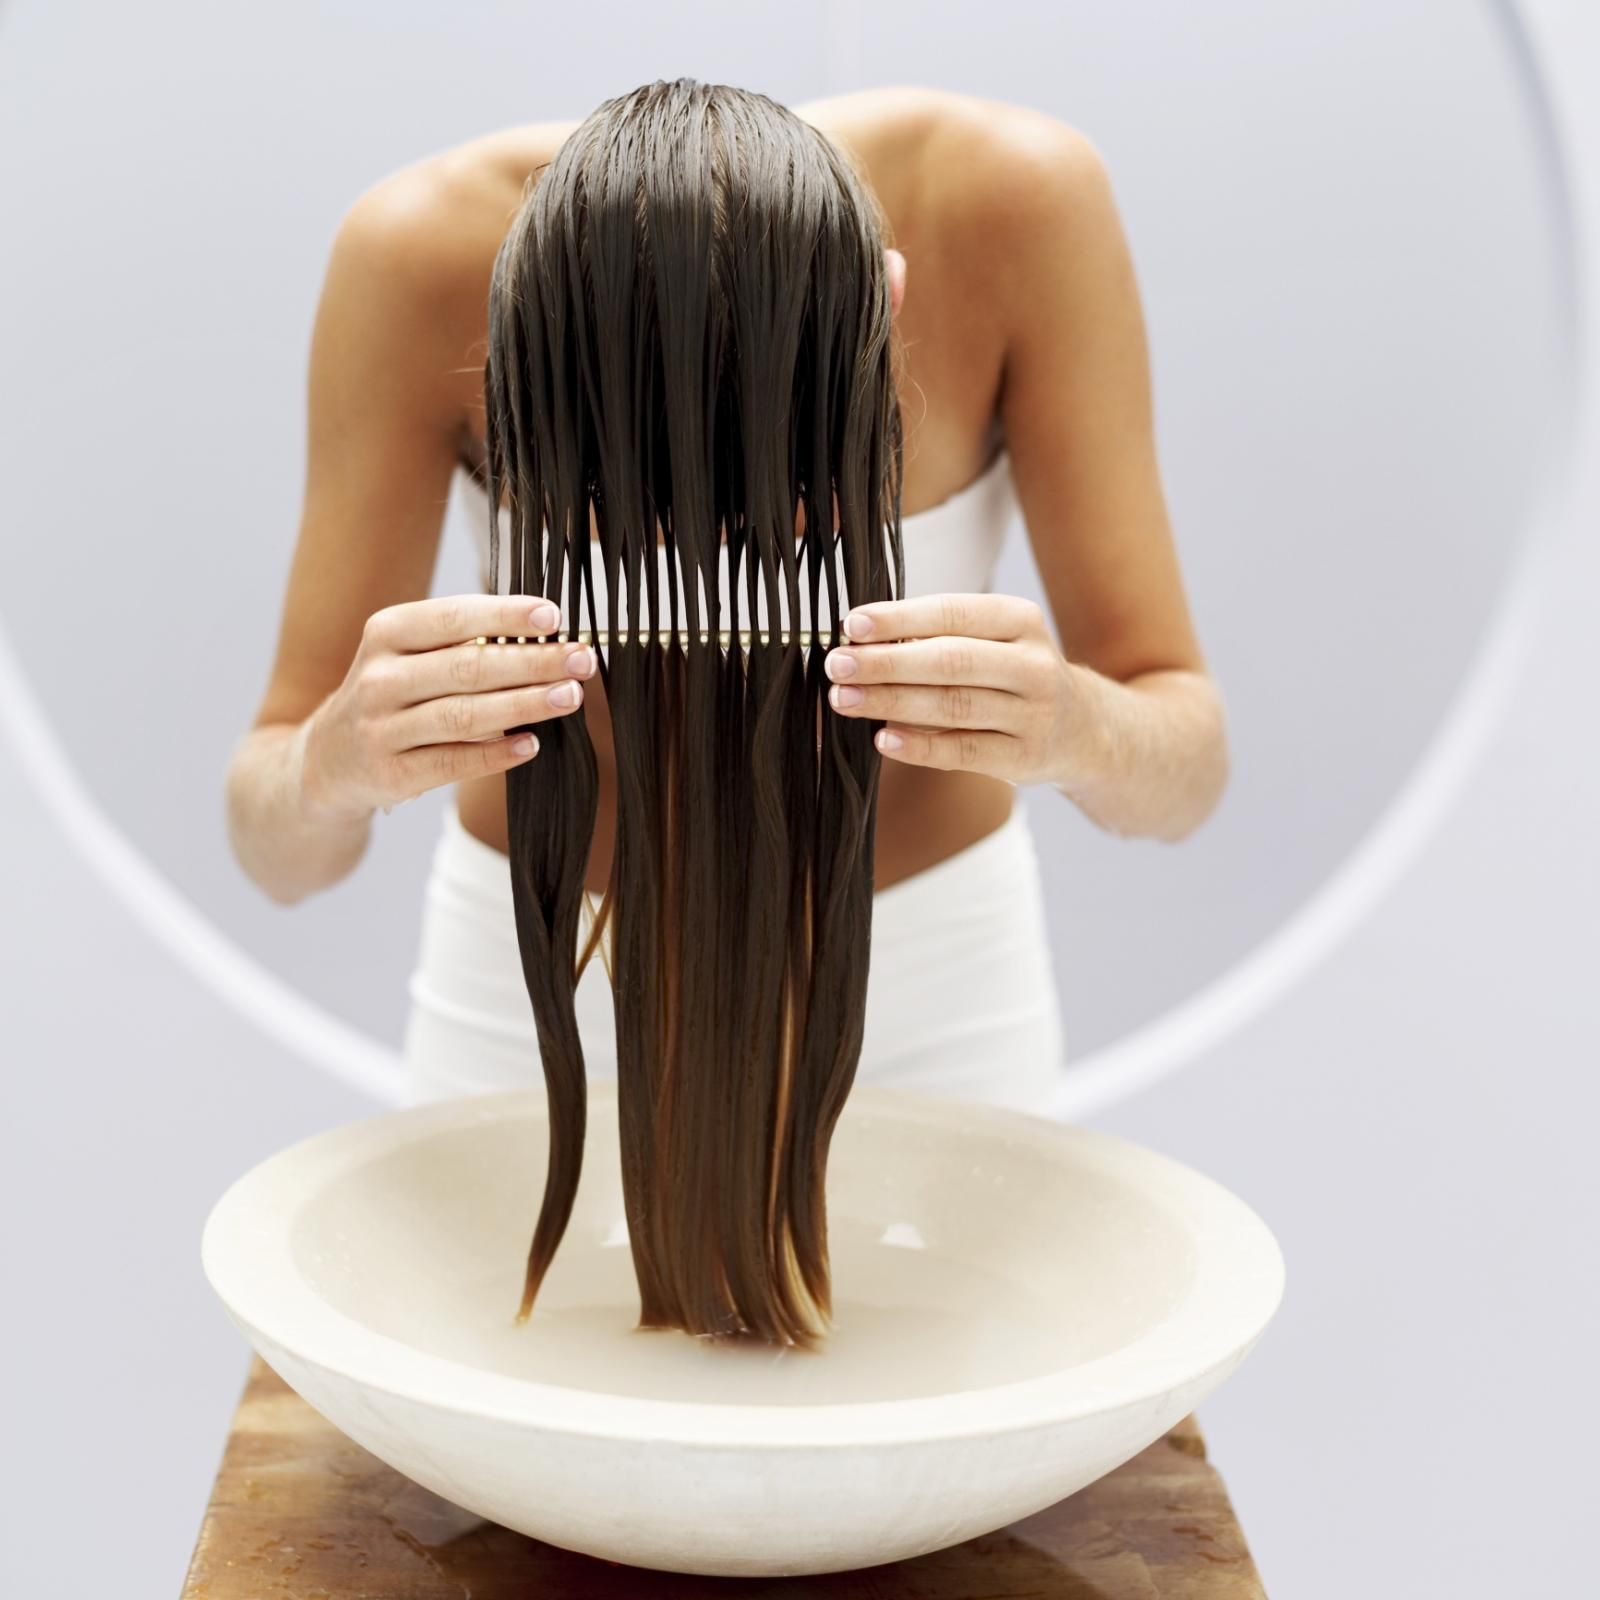 Once a week: Heat olive oil and honey to boil. cool then comb through your hair.